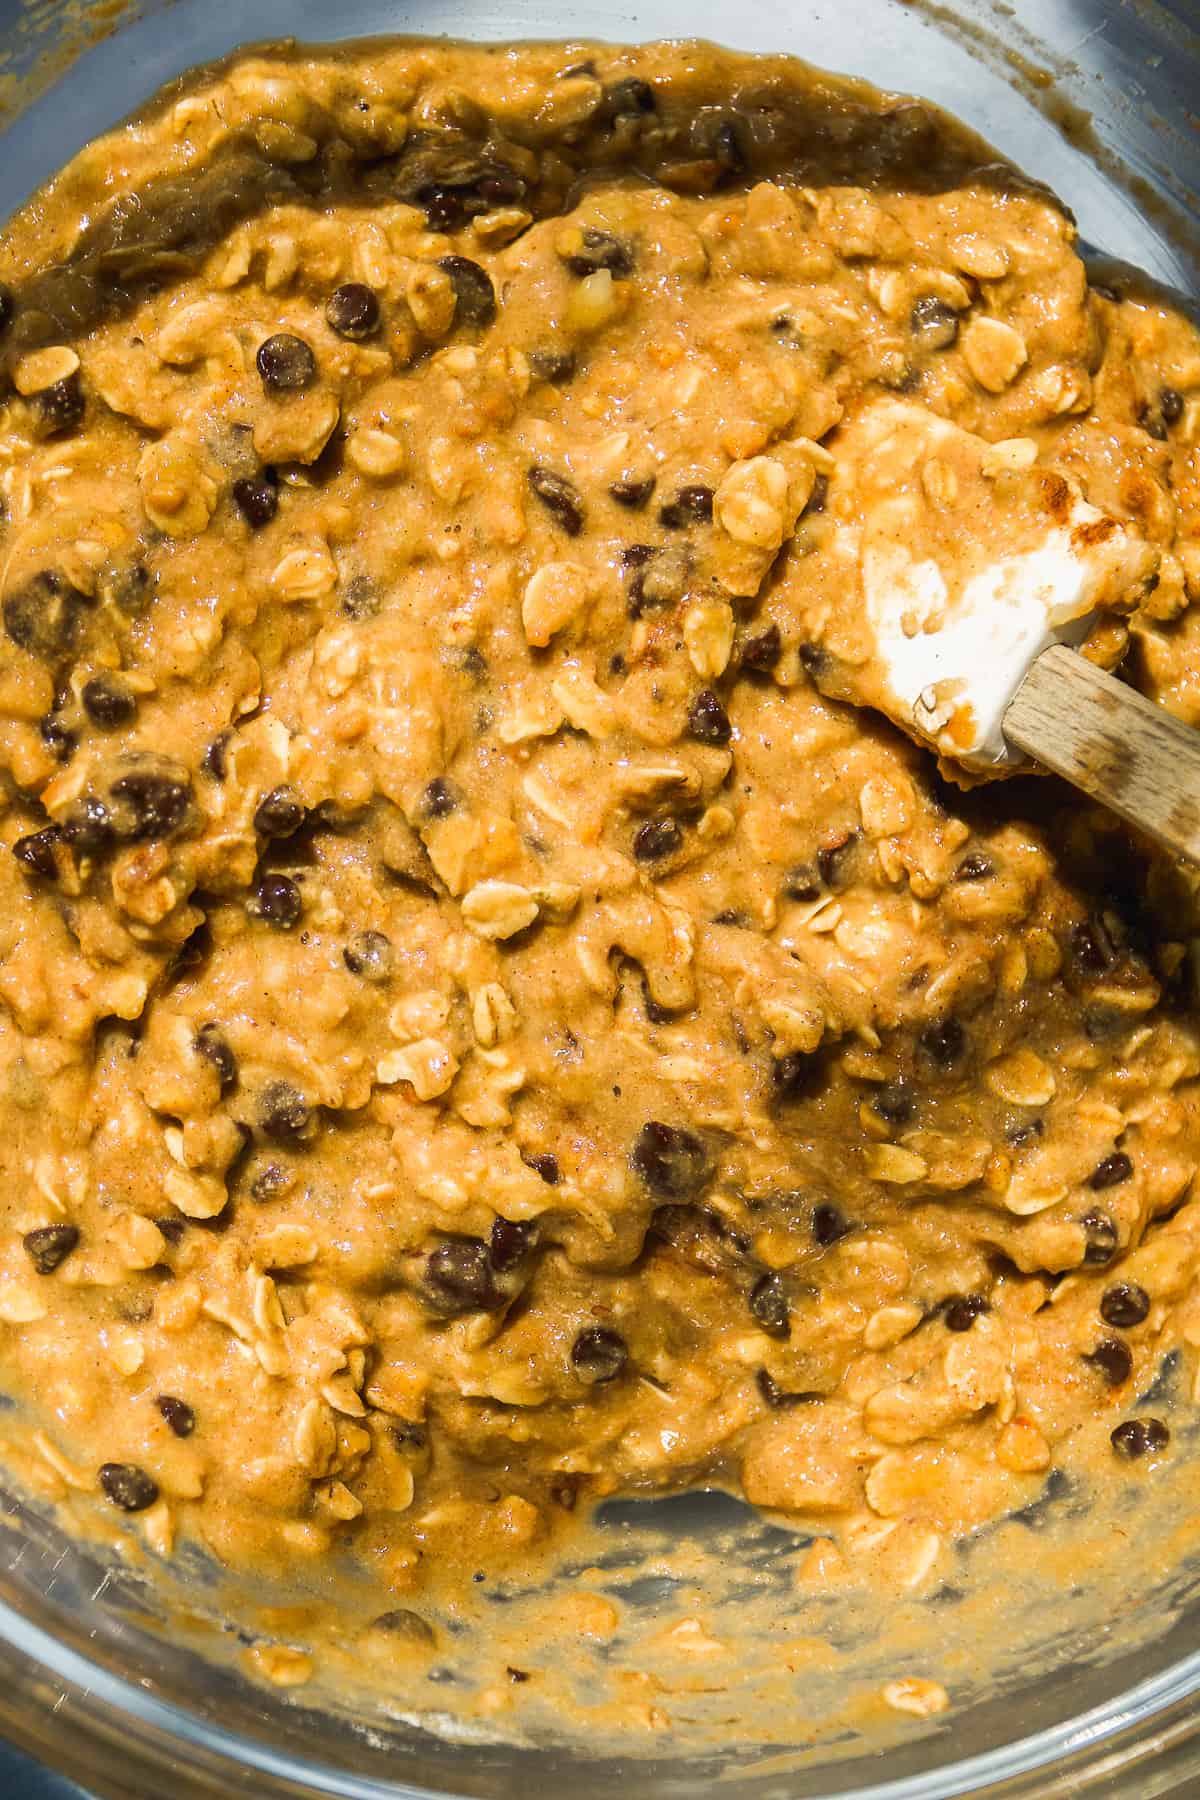 Overhead view of a mixing bowl with peanut butter banana oatmeal cookie batter.